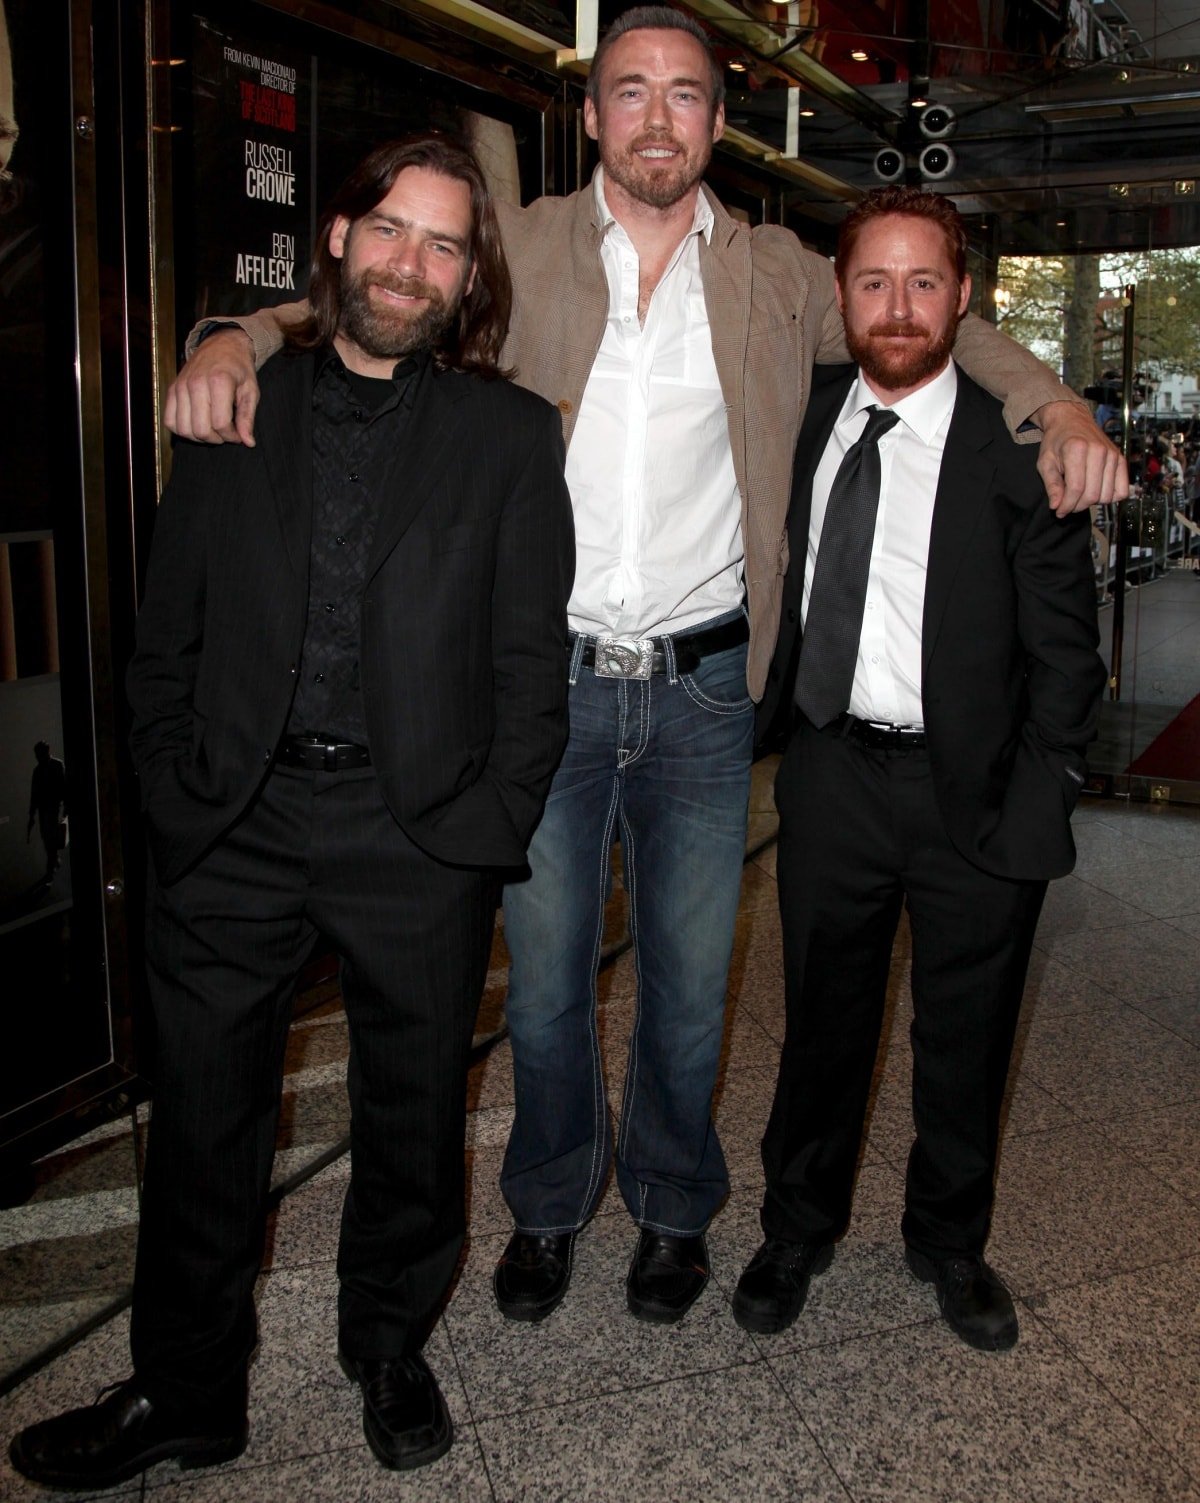 Kevin Durand towering over his Robin Hood co-stars Alan Doyle and Scott Grimes at the UK premiere of State of Play